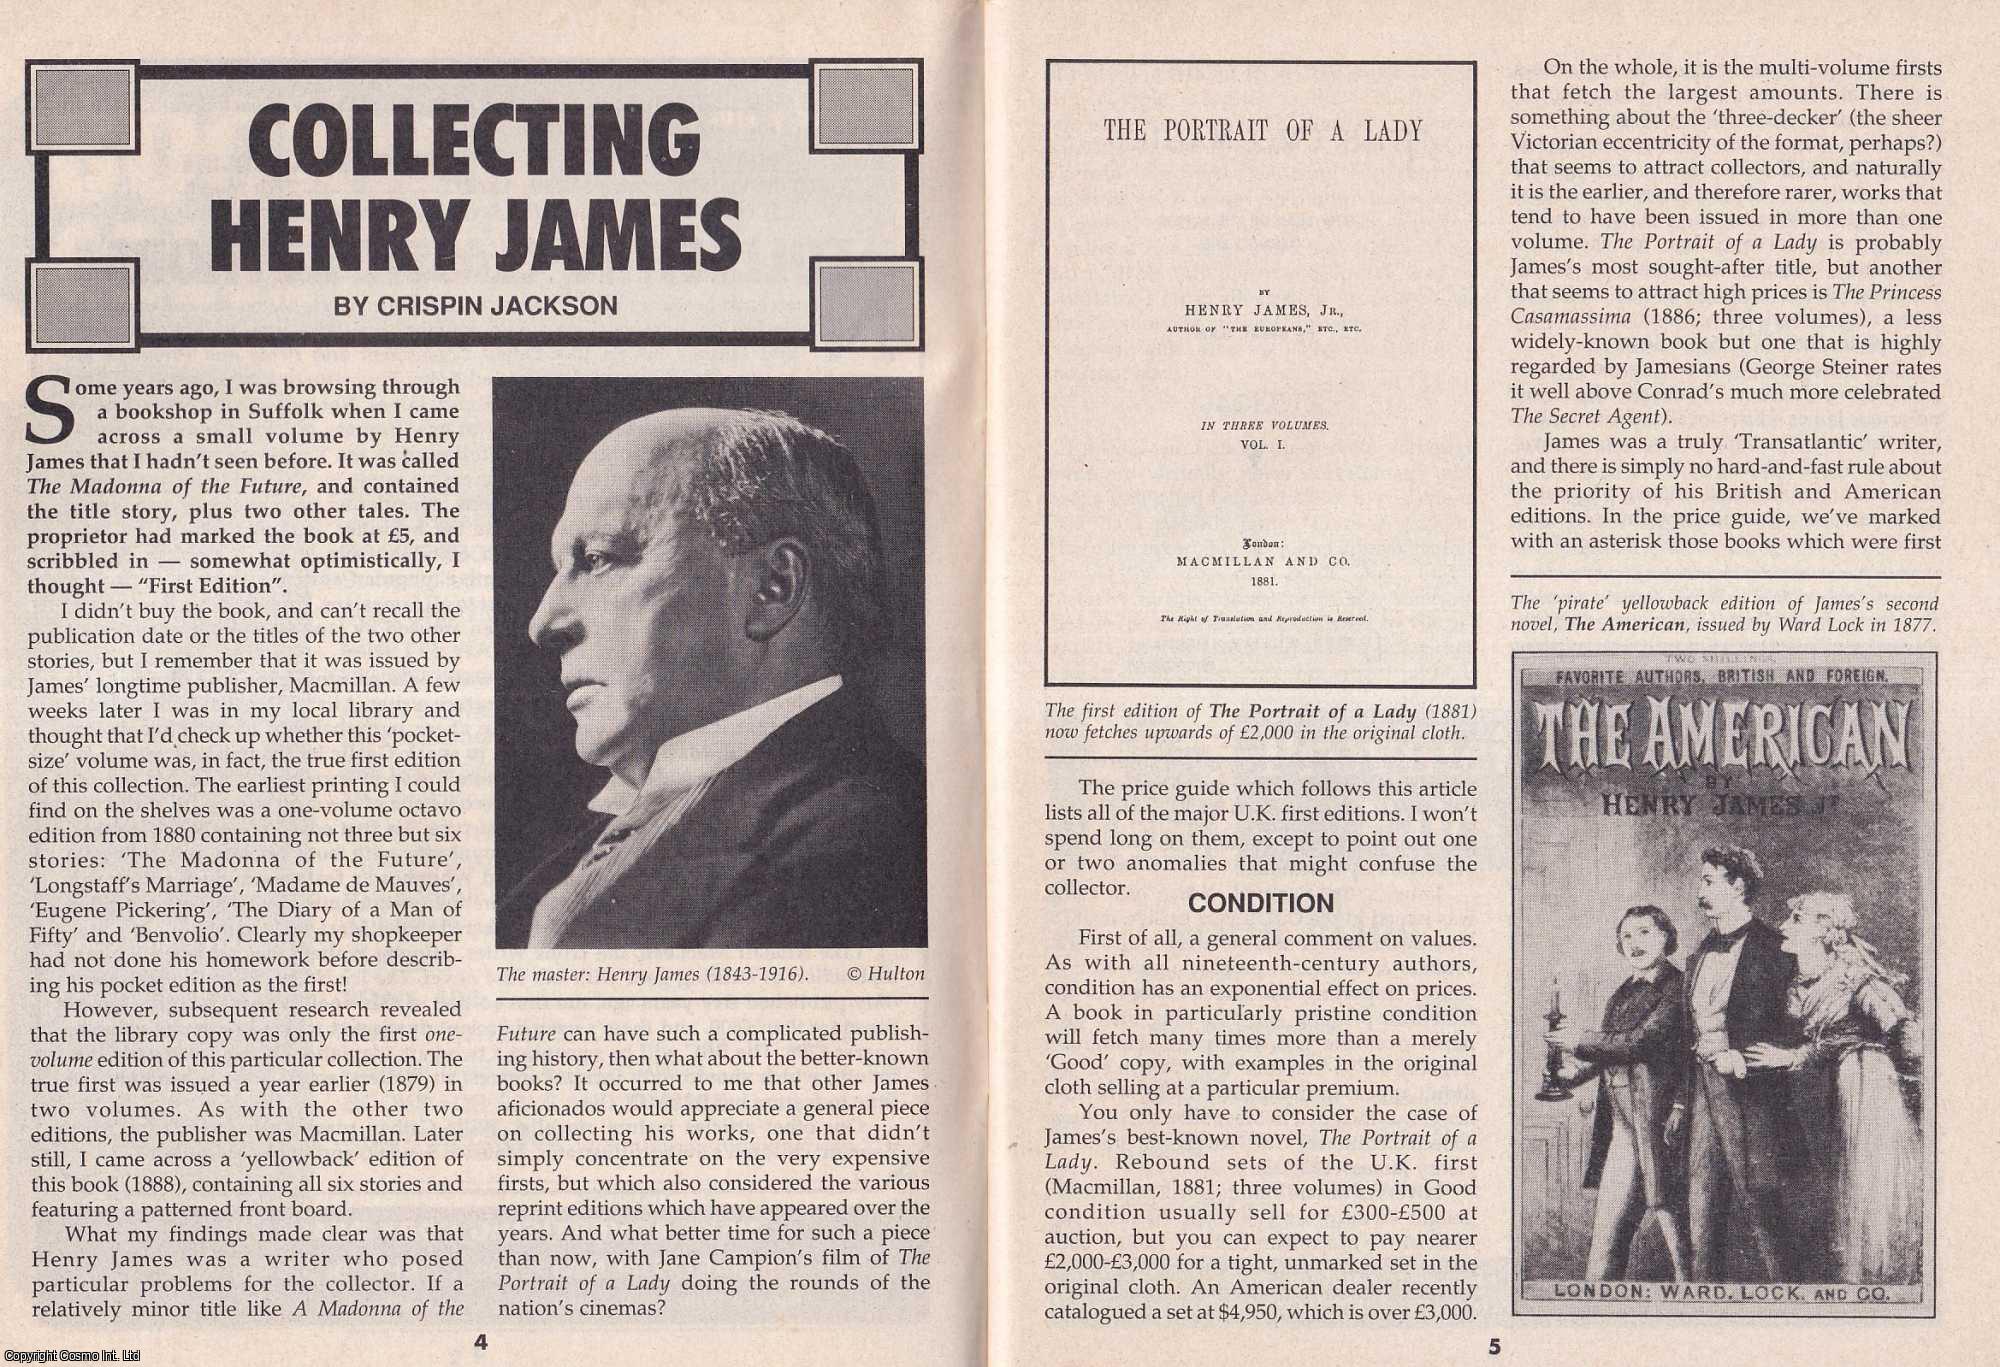 Crispin Jackson - Collecting Henry James. This is an original article separated from an issue of The Book & Magazine Collector publication.